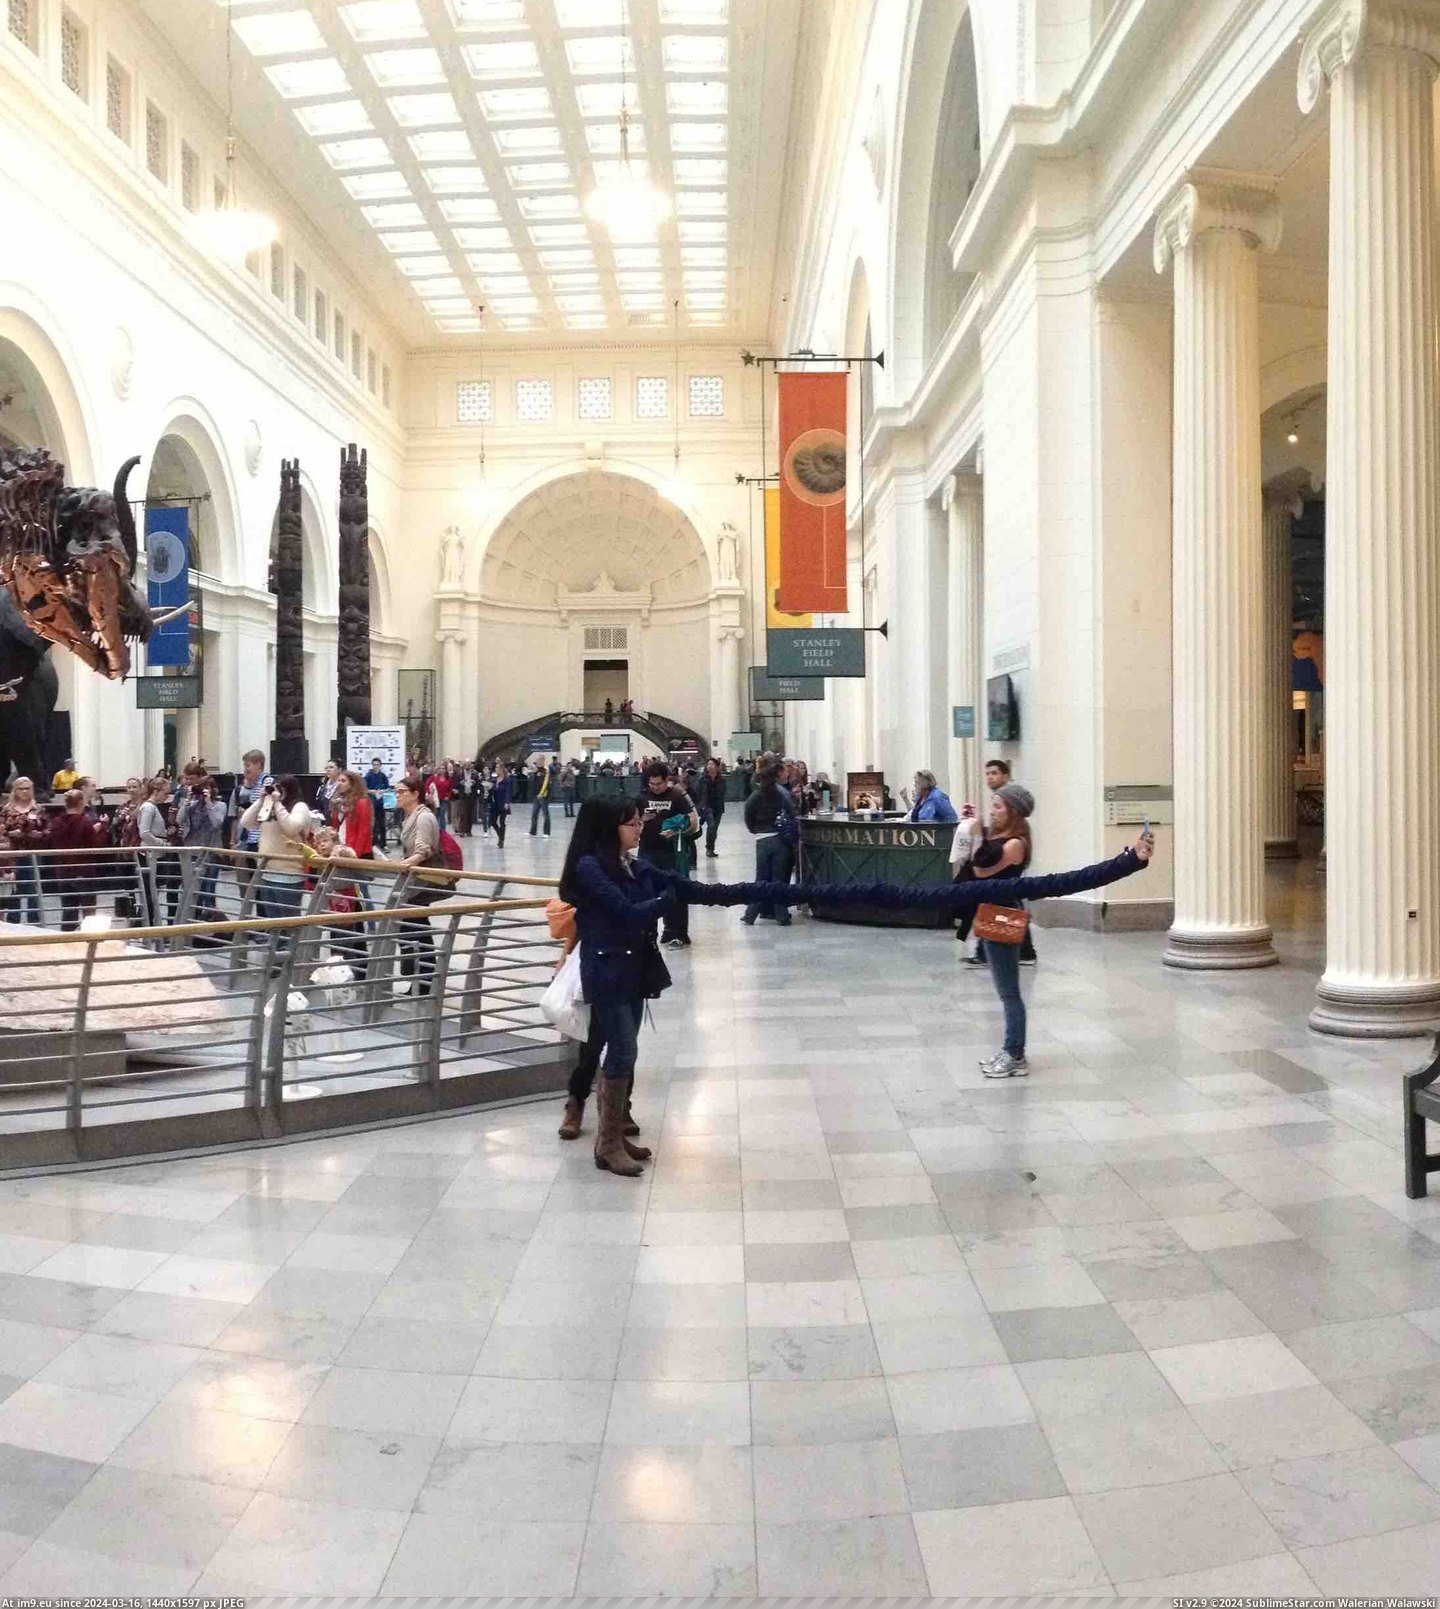 #Girl #Photo #Selfie #Ultimate #Panoramic #Ended #Making #Museum #Hand [Pics] took a panoramic photo at a museum and ended up making it look like this girl has the ultimate selfie hand. Pic. (Image of album My r/PICS favs))